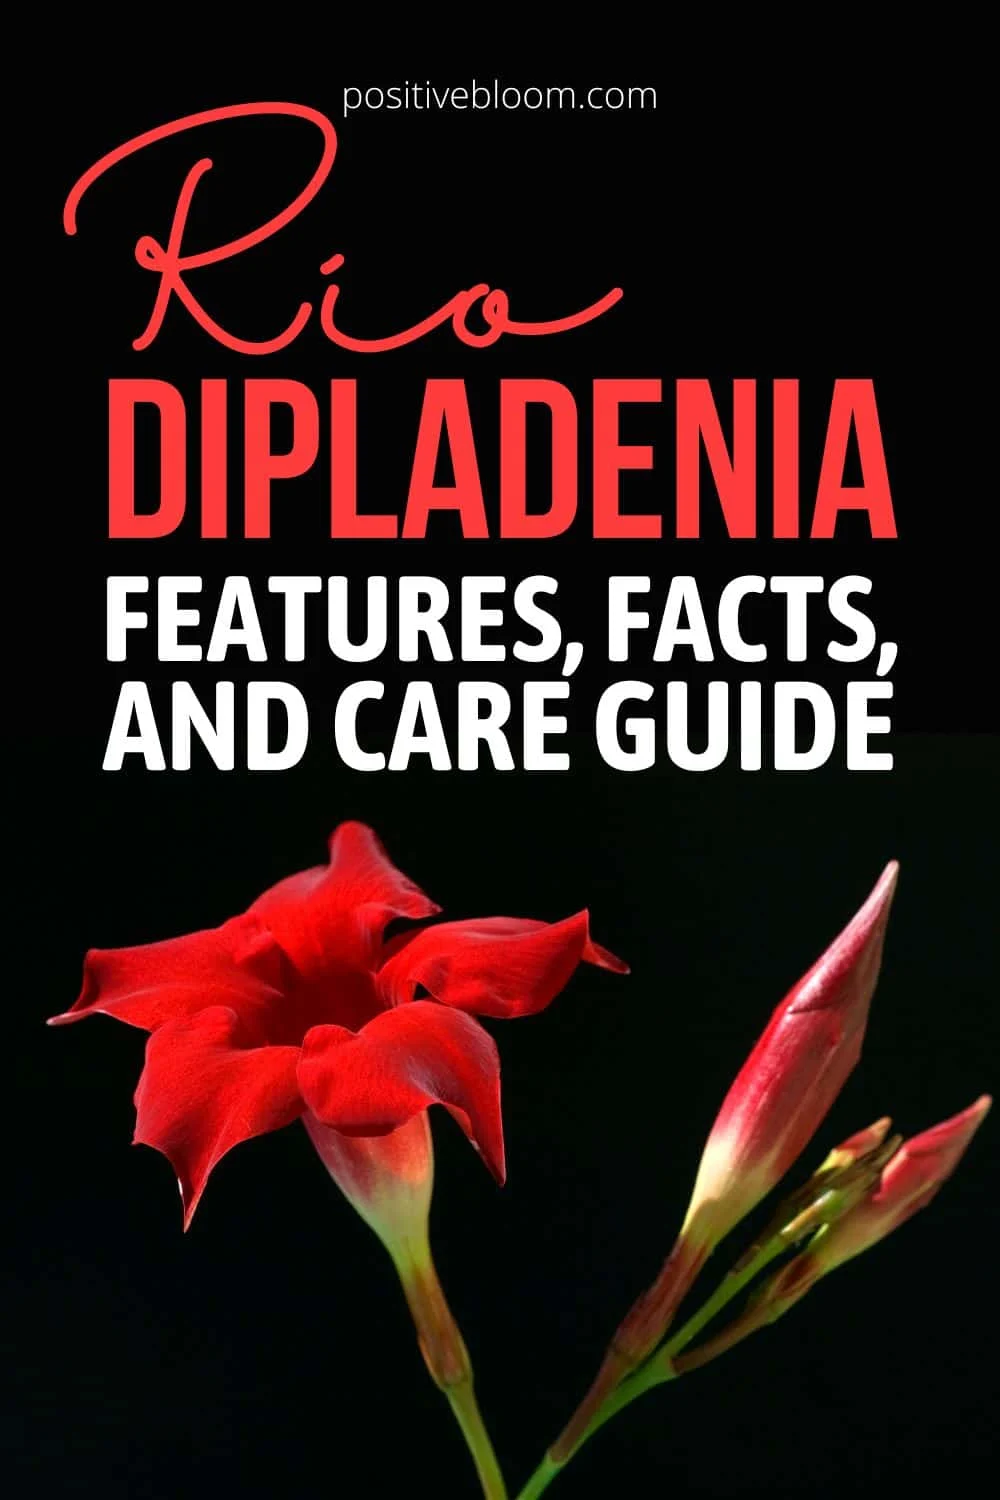 Rio Dipladenia Features, Facts, And Care Guide